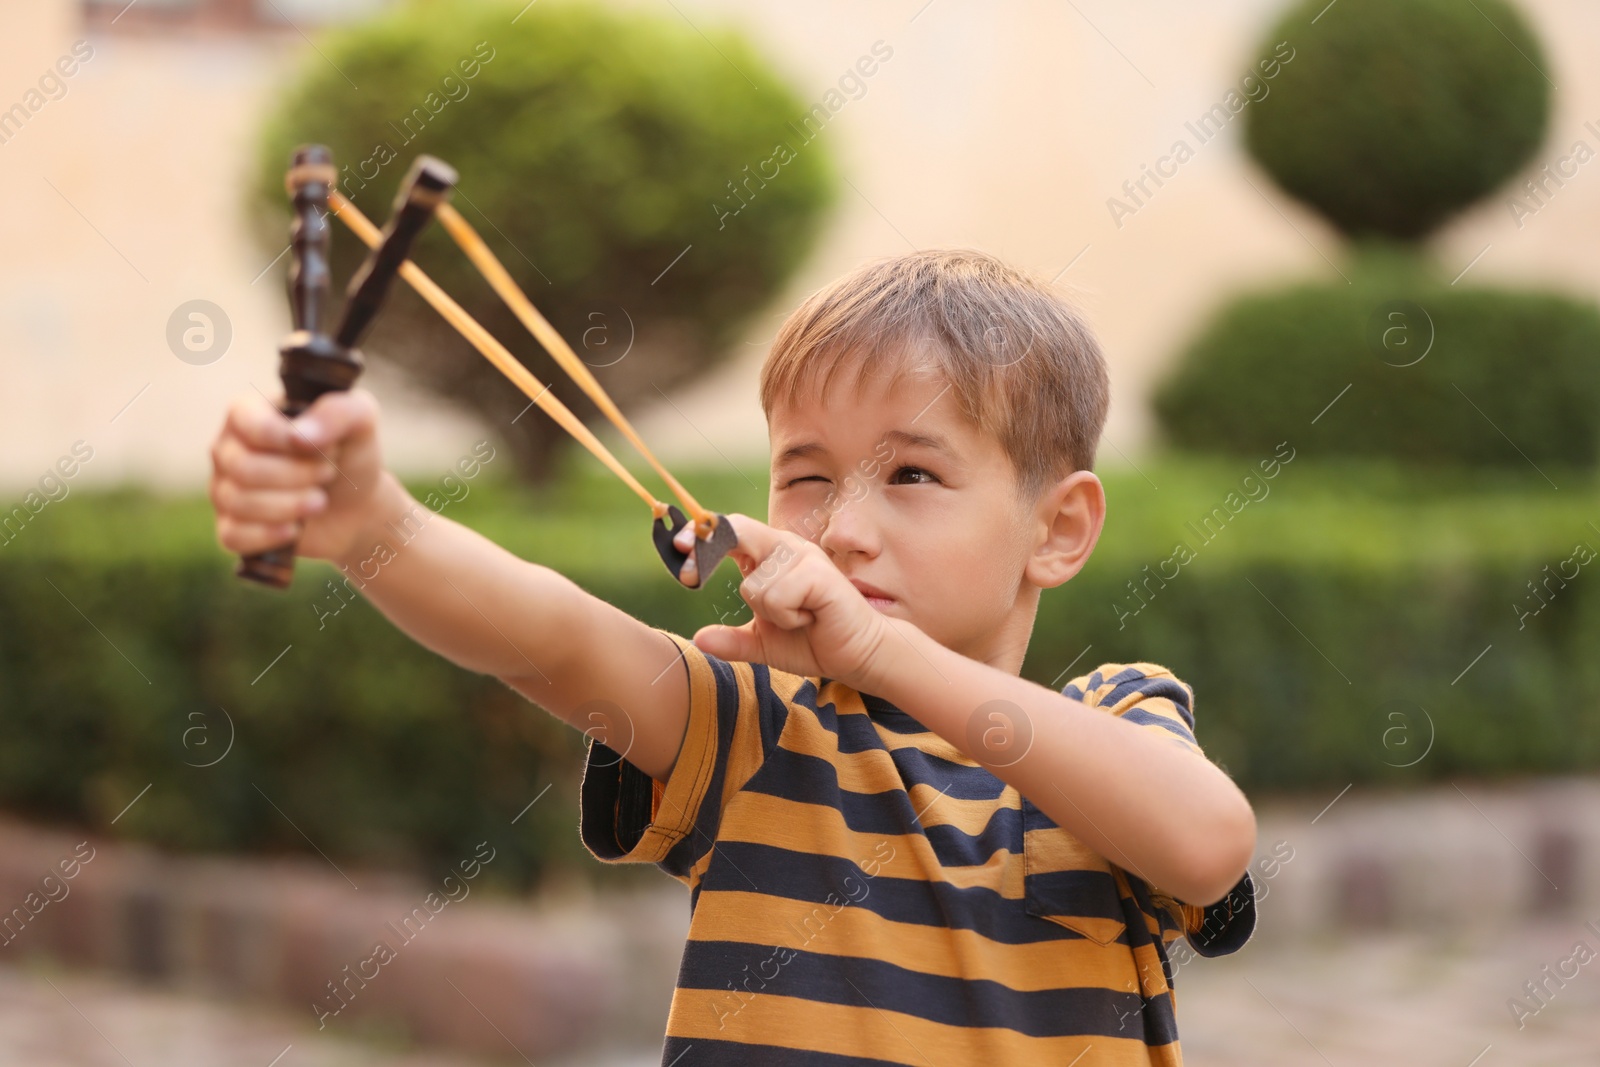 Photo of Little boy playing with slingshot in park